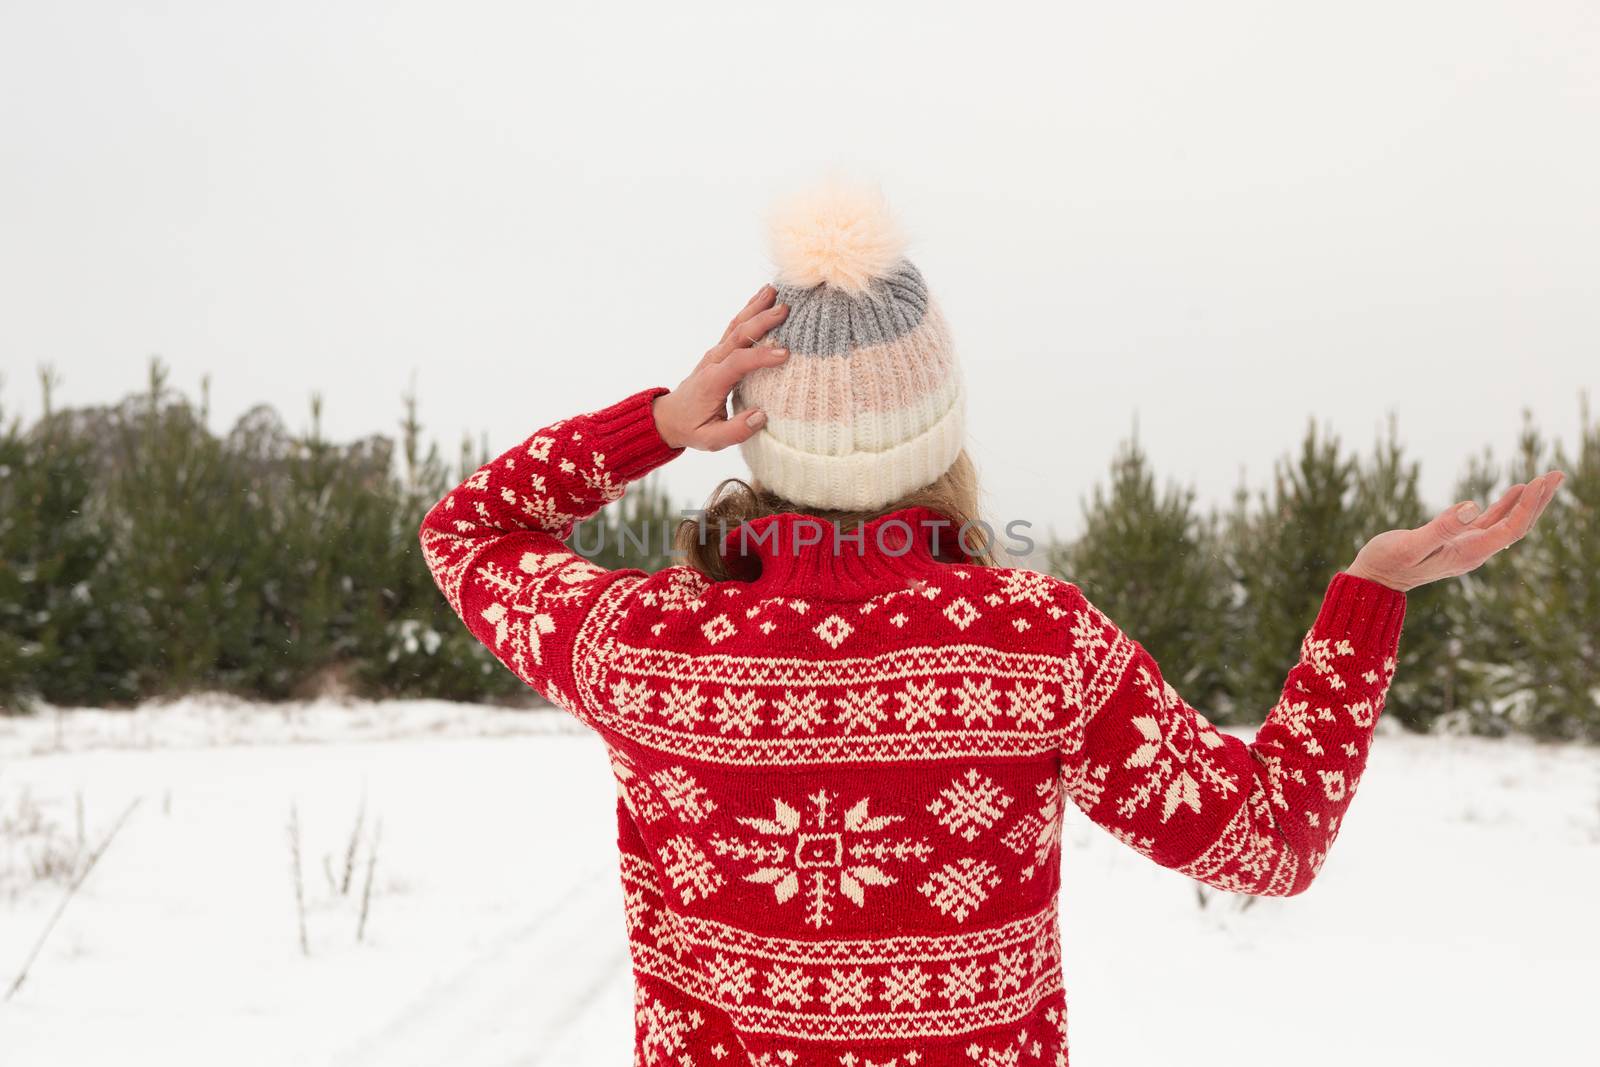 Woman wearing festive sweater and a cosy beanie standing in a winter landscape covered in snow with snow falling